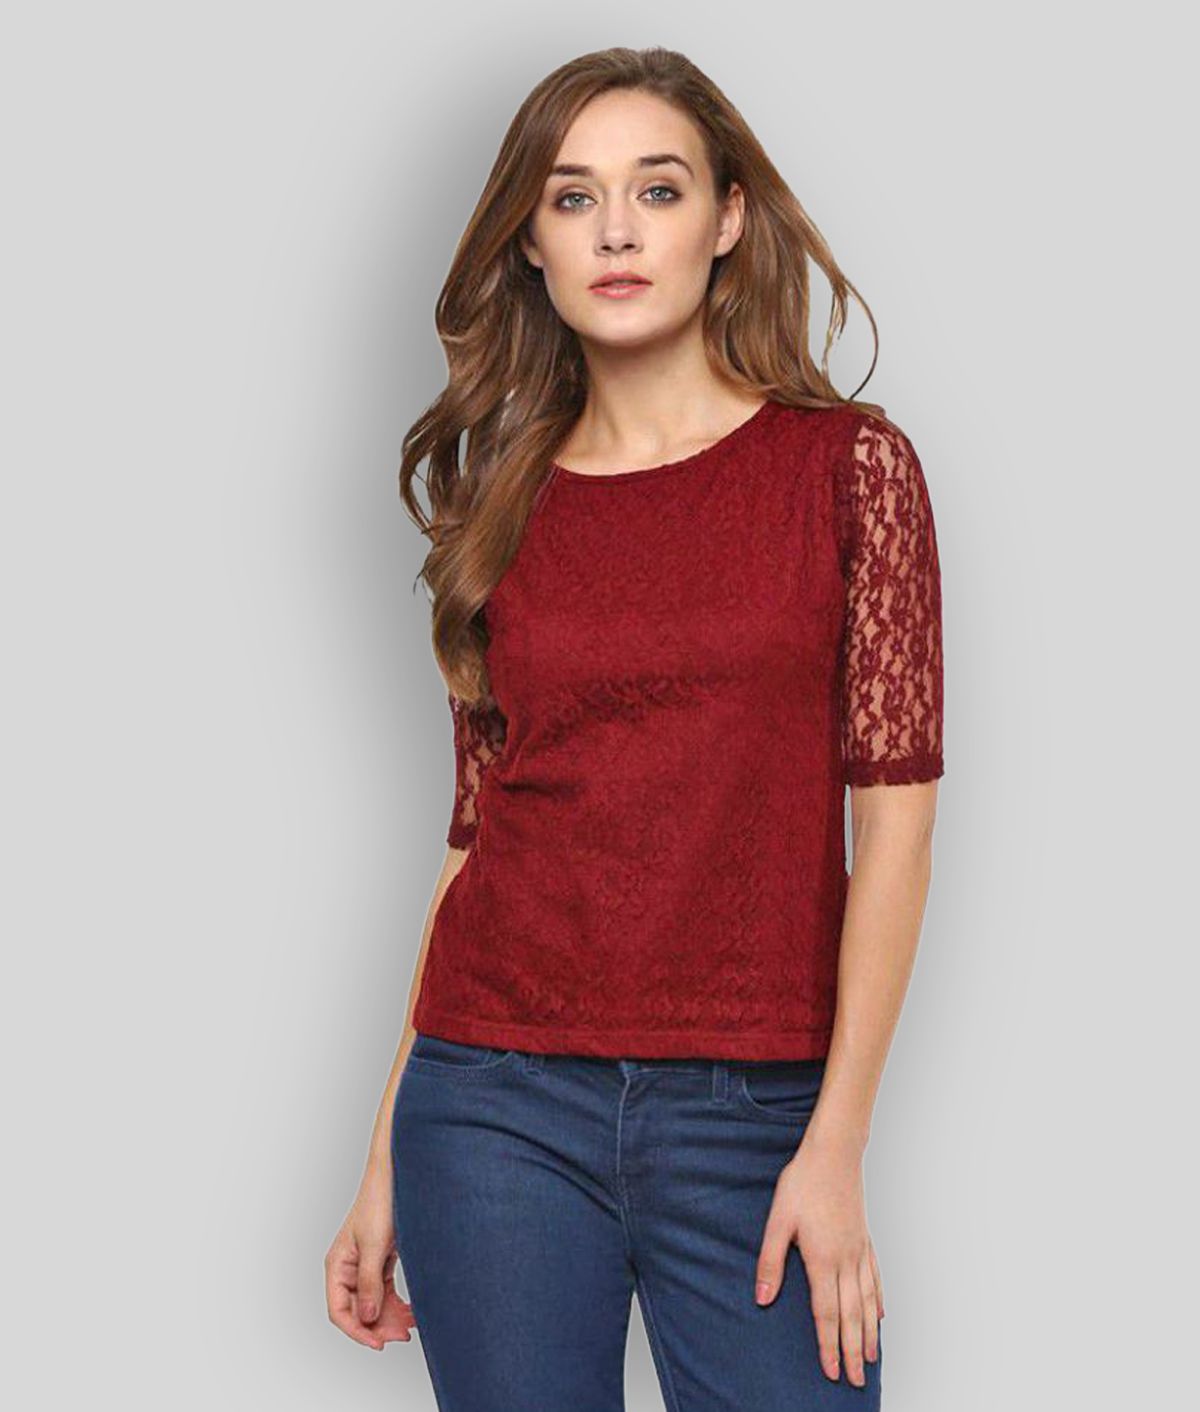     			Miss Chase - Maroon Cotton Women's Regular Top ( Pack of 1 )